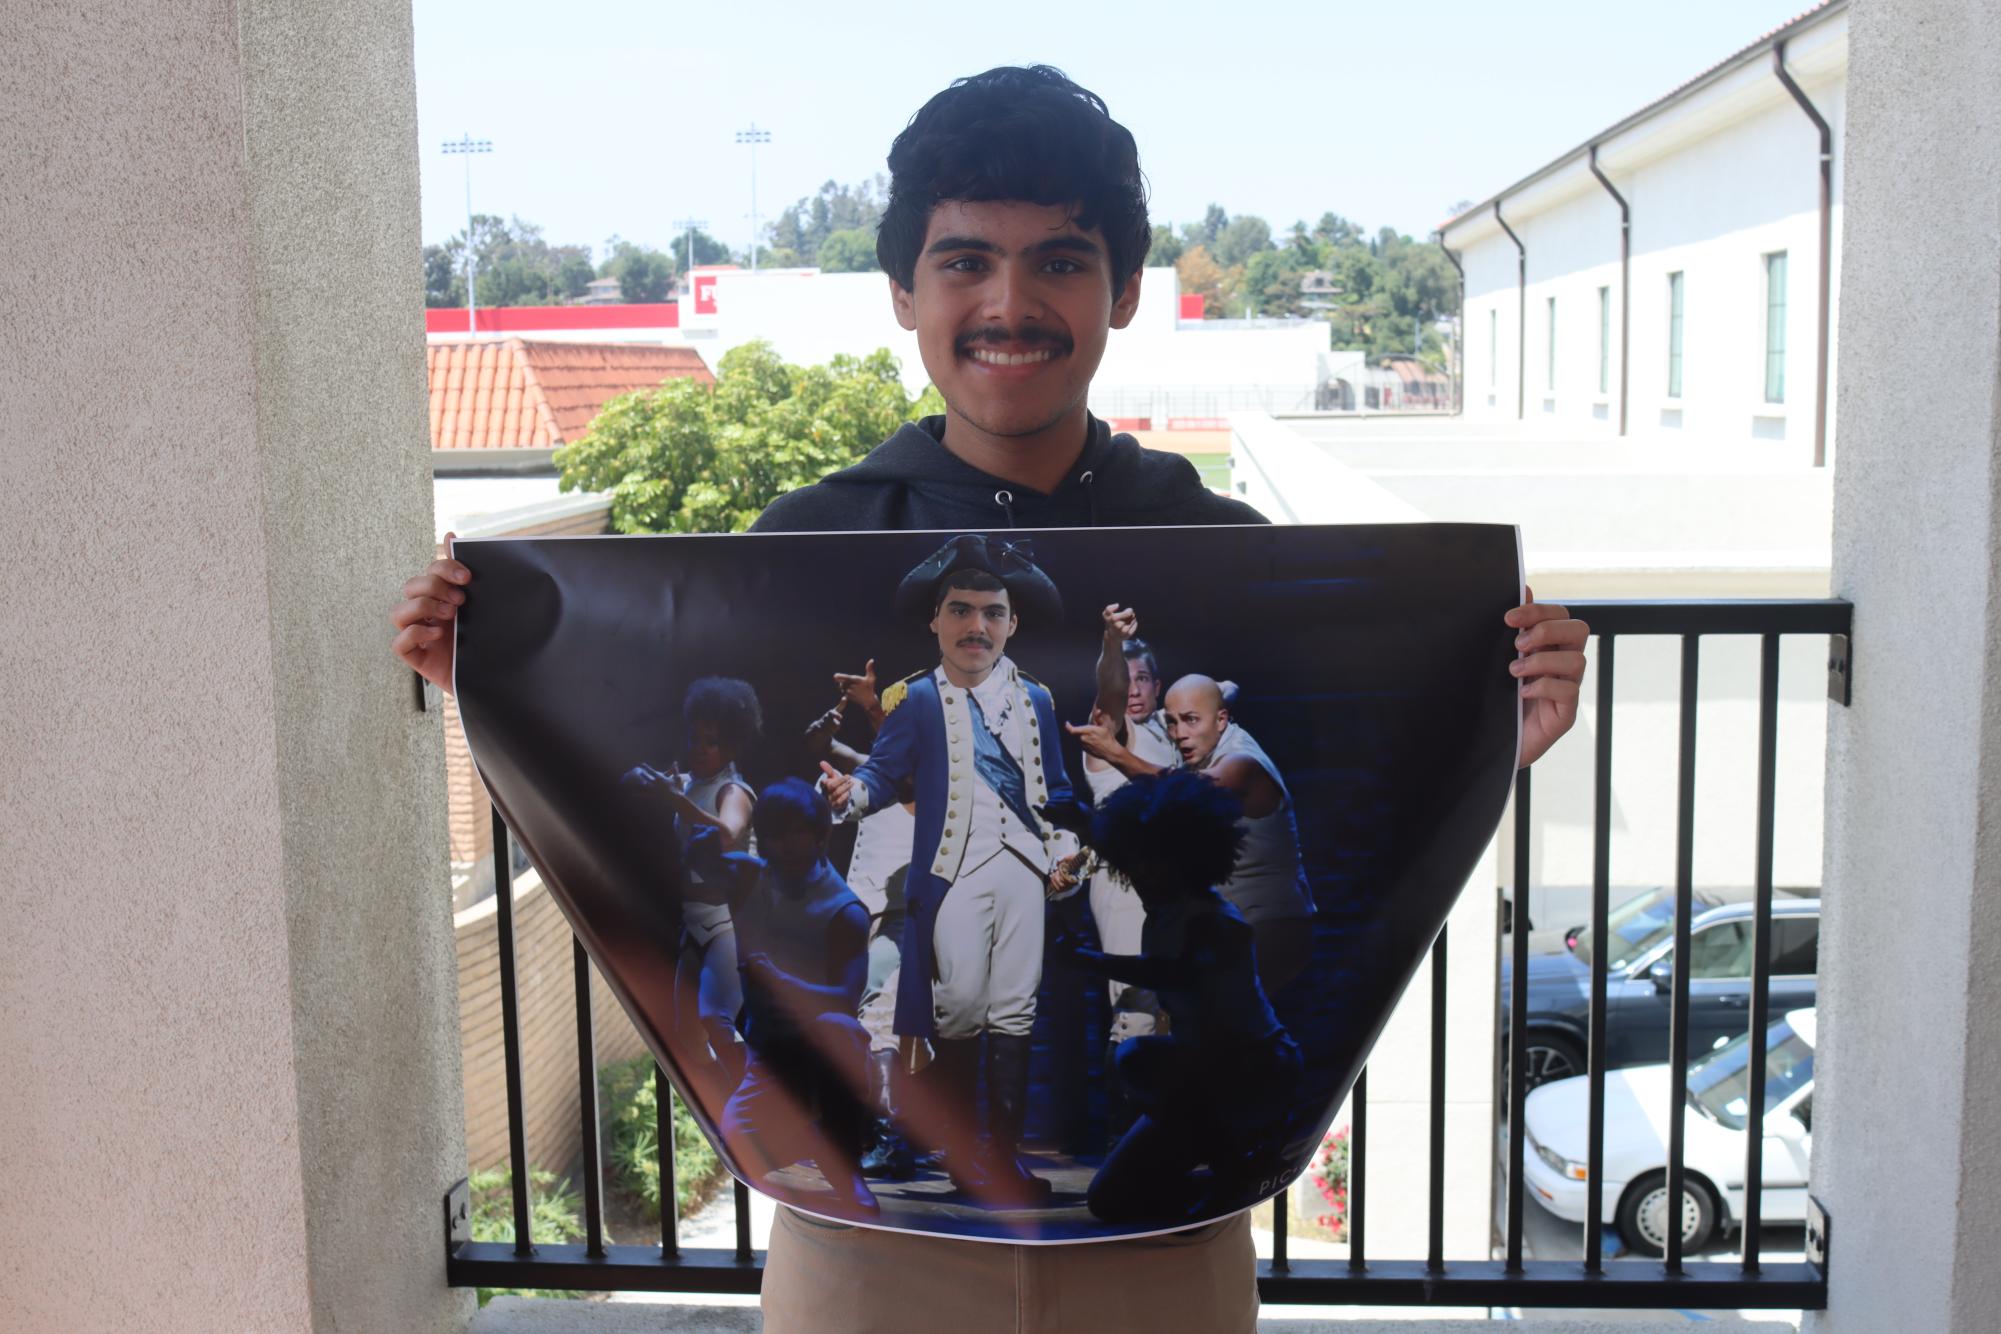 Piña-Villanuevas first real role was as George Washington during an elementary school play. Here, he holds a photoshopped poster created by Eadyn Ochoa.